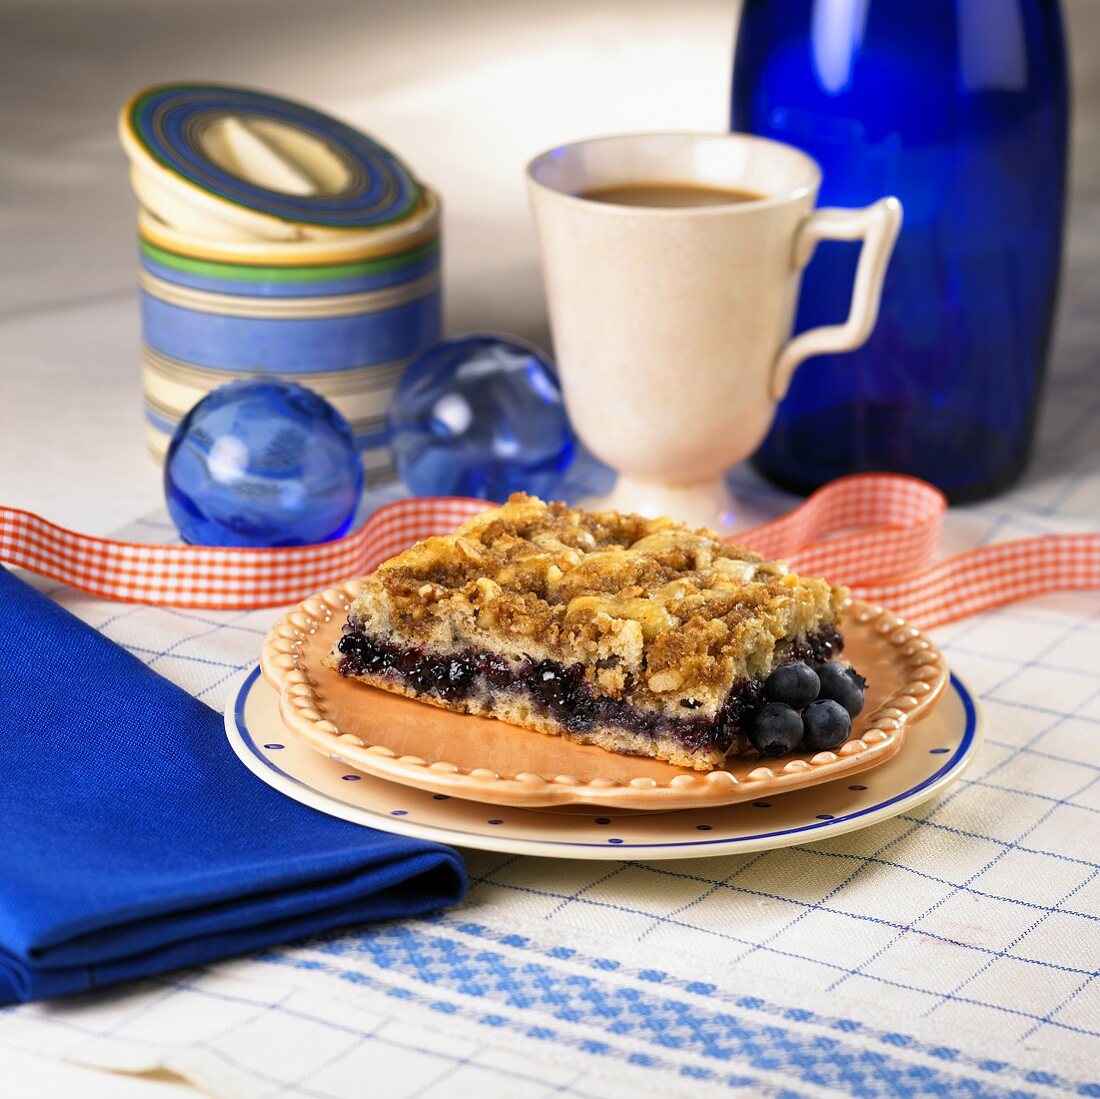 A Piece of Blueberry Coffee Cake with Coffee